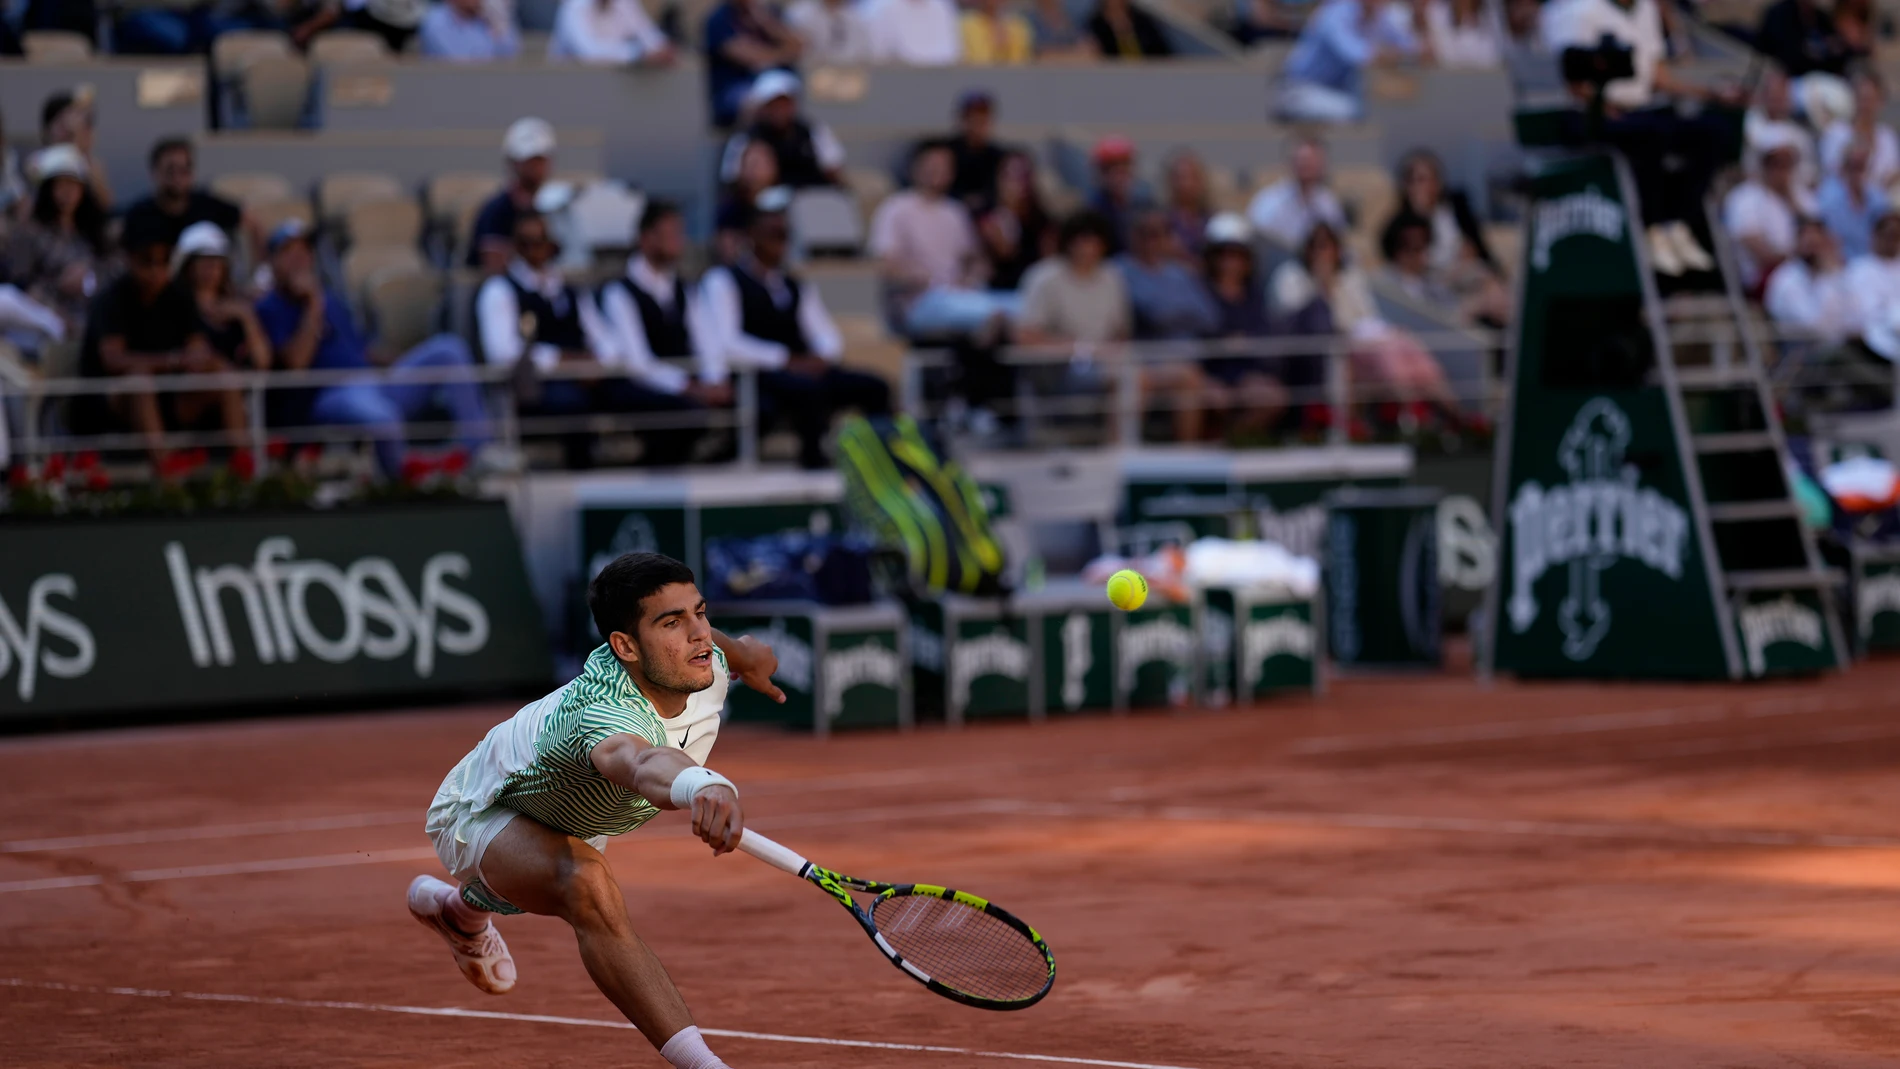 Spain's Carlos Alcaraz plays a shot against Italy's Lorenzo Musetti during their fourth round match of the French Open tennis tournament at the Roland Garros stadium in Paris, Sunday, June 4, 2023. (AP Photo/Thibault Camus)